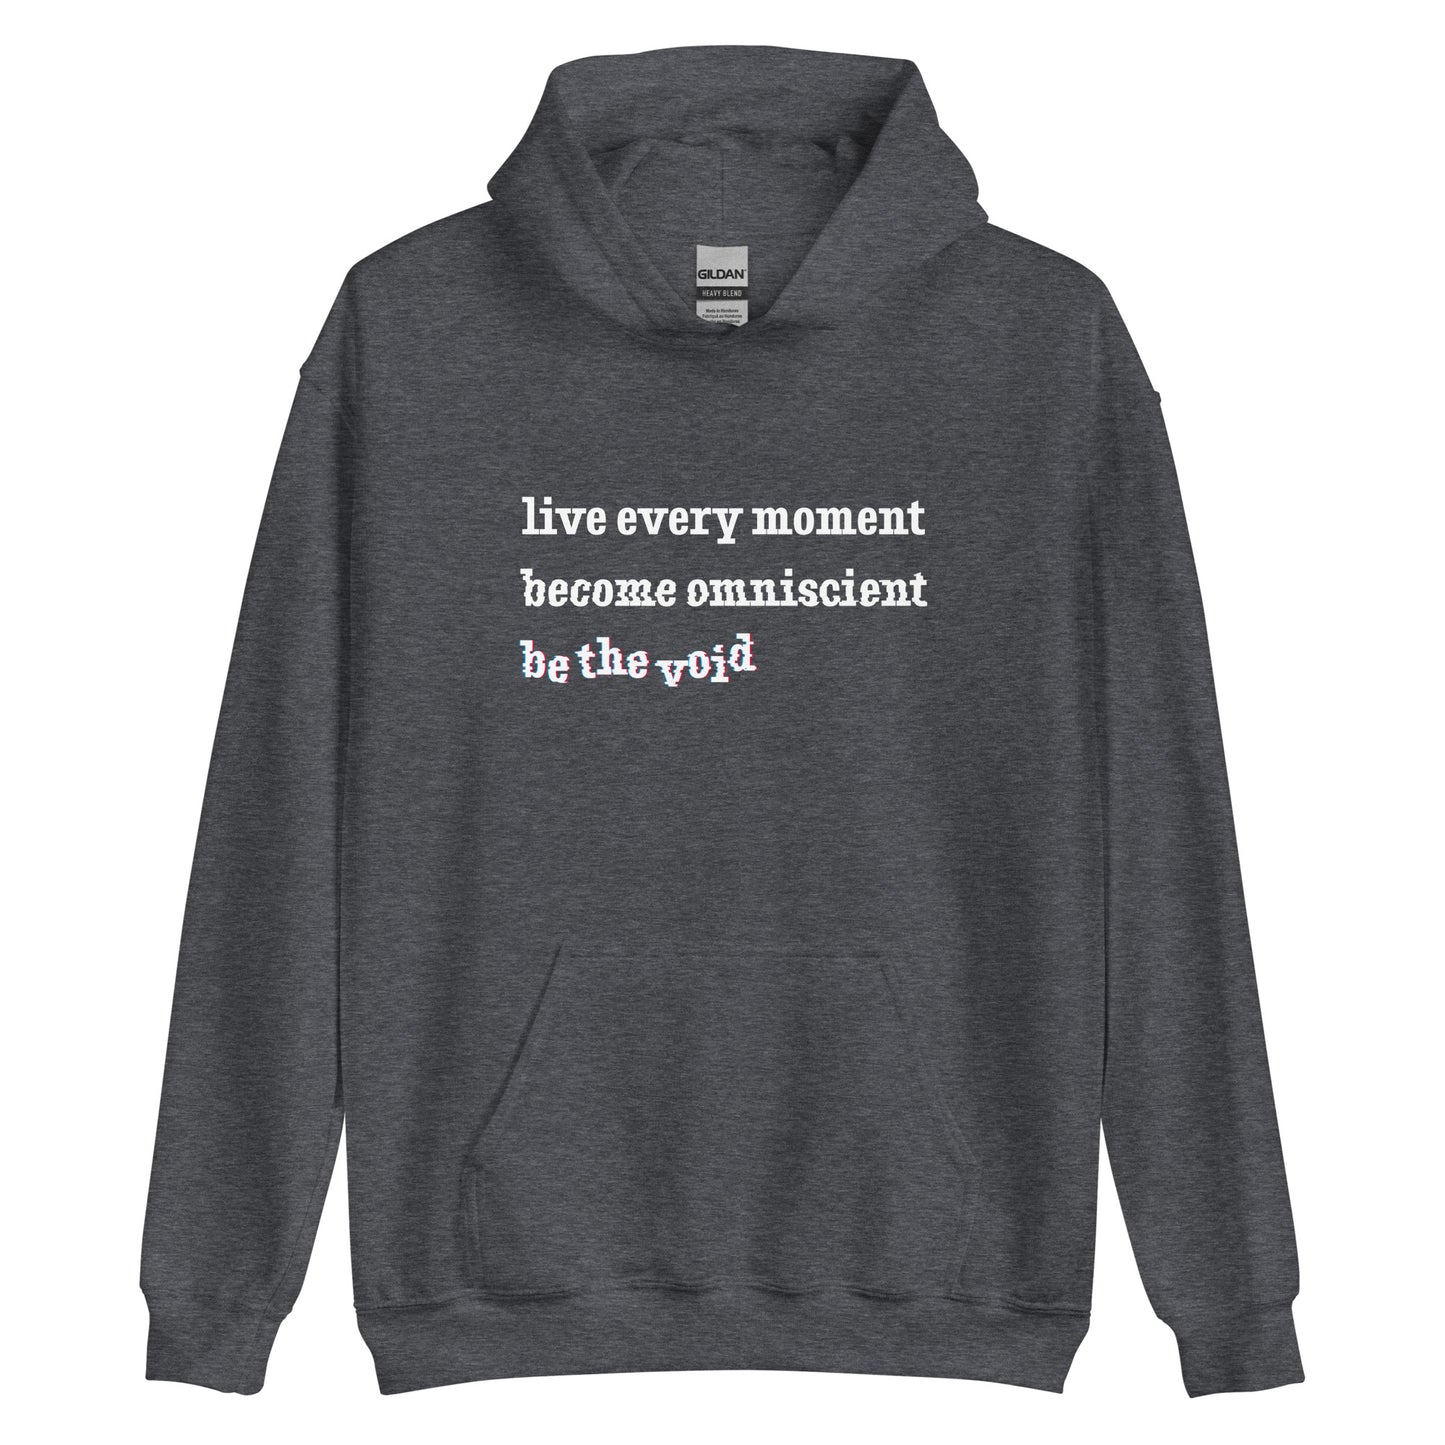 A dark heather grey hooded sweatshirt featuring text reading "live every moment, become omniscient, be the void" in an increasingly distorted font.